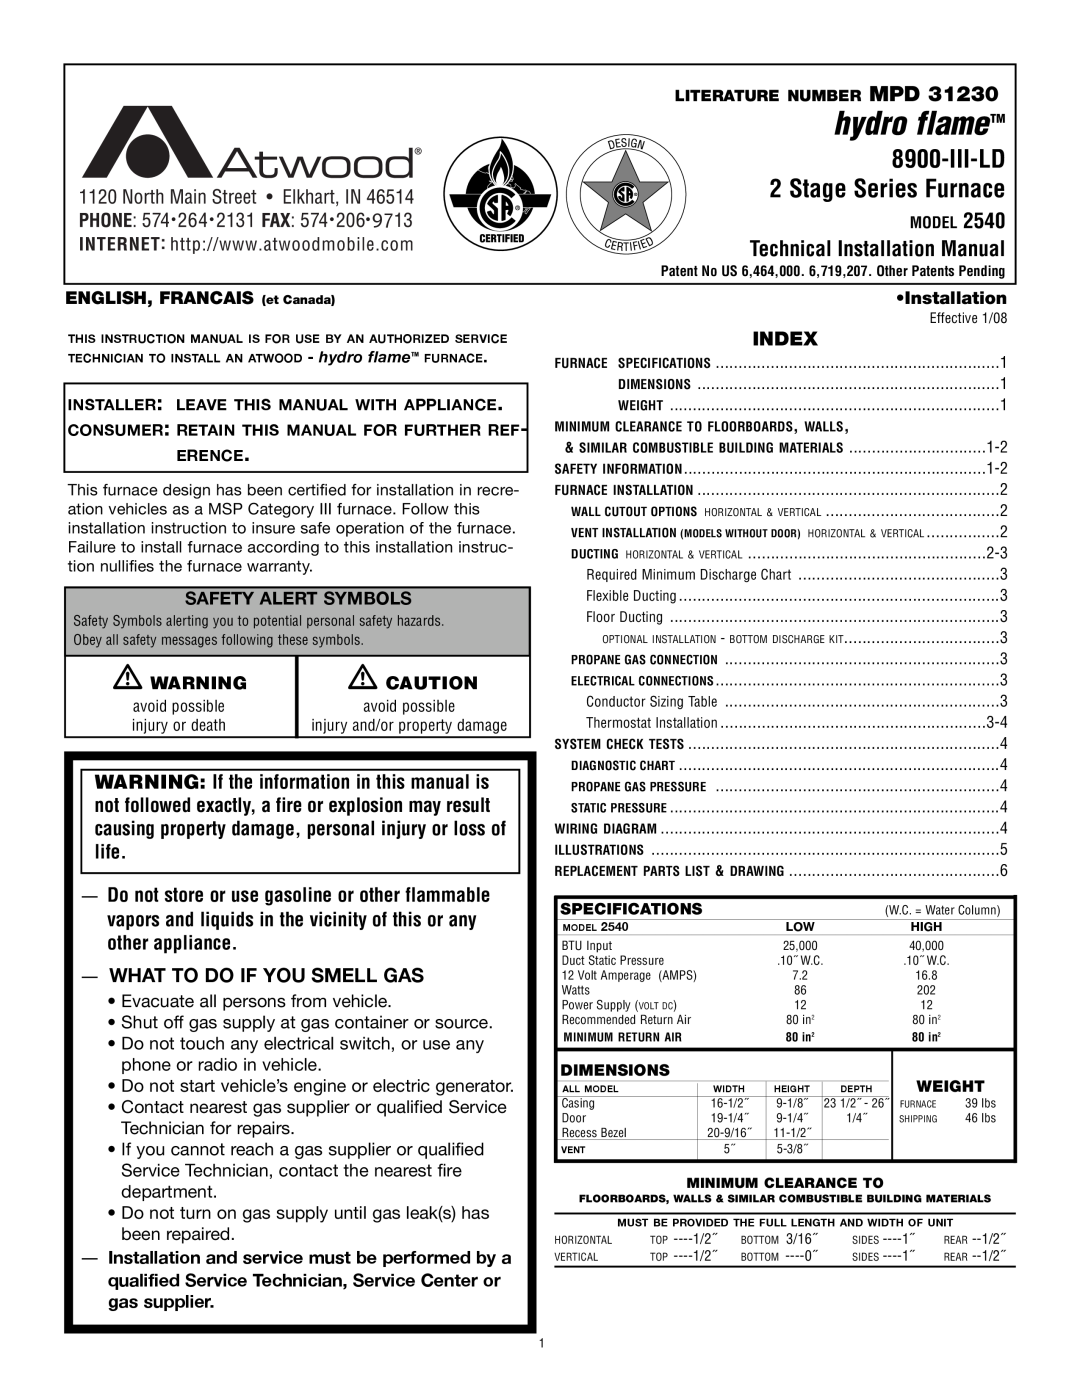 Atwood Mobile Products 2540 installation manual What To Do If You Smell Gas, Index, hydro flameTM, Iii-Ld 